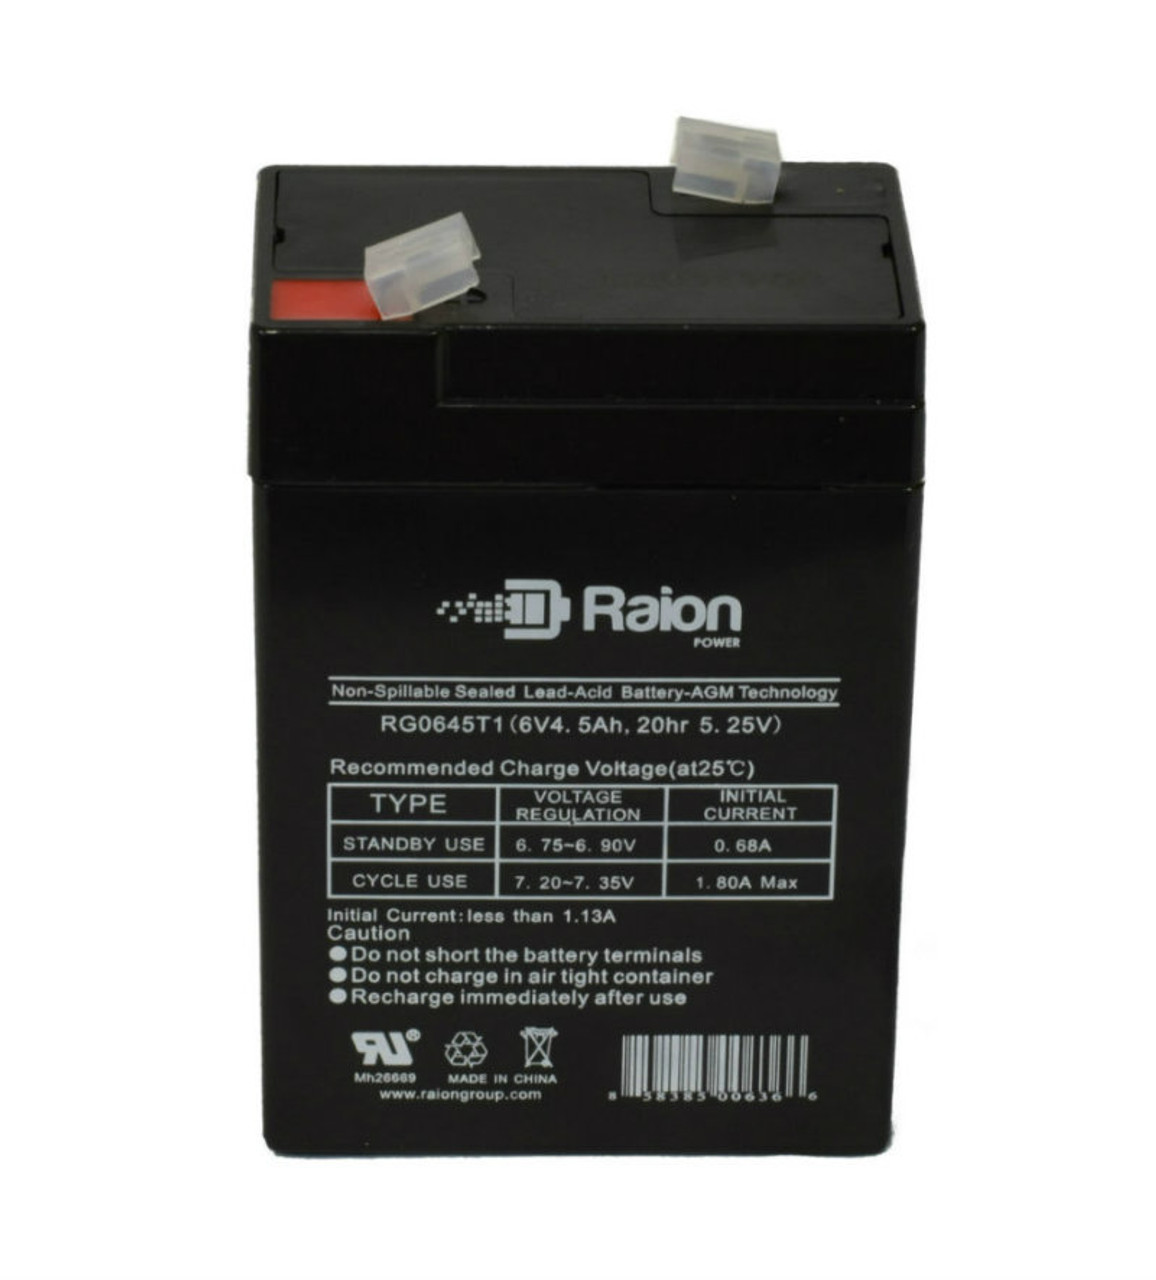 Raion Power RG0645T1 Replacement Battery Cartridge for Light Alarms RX7